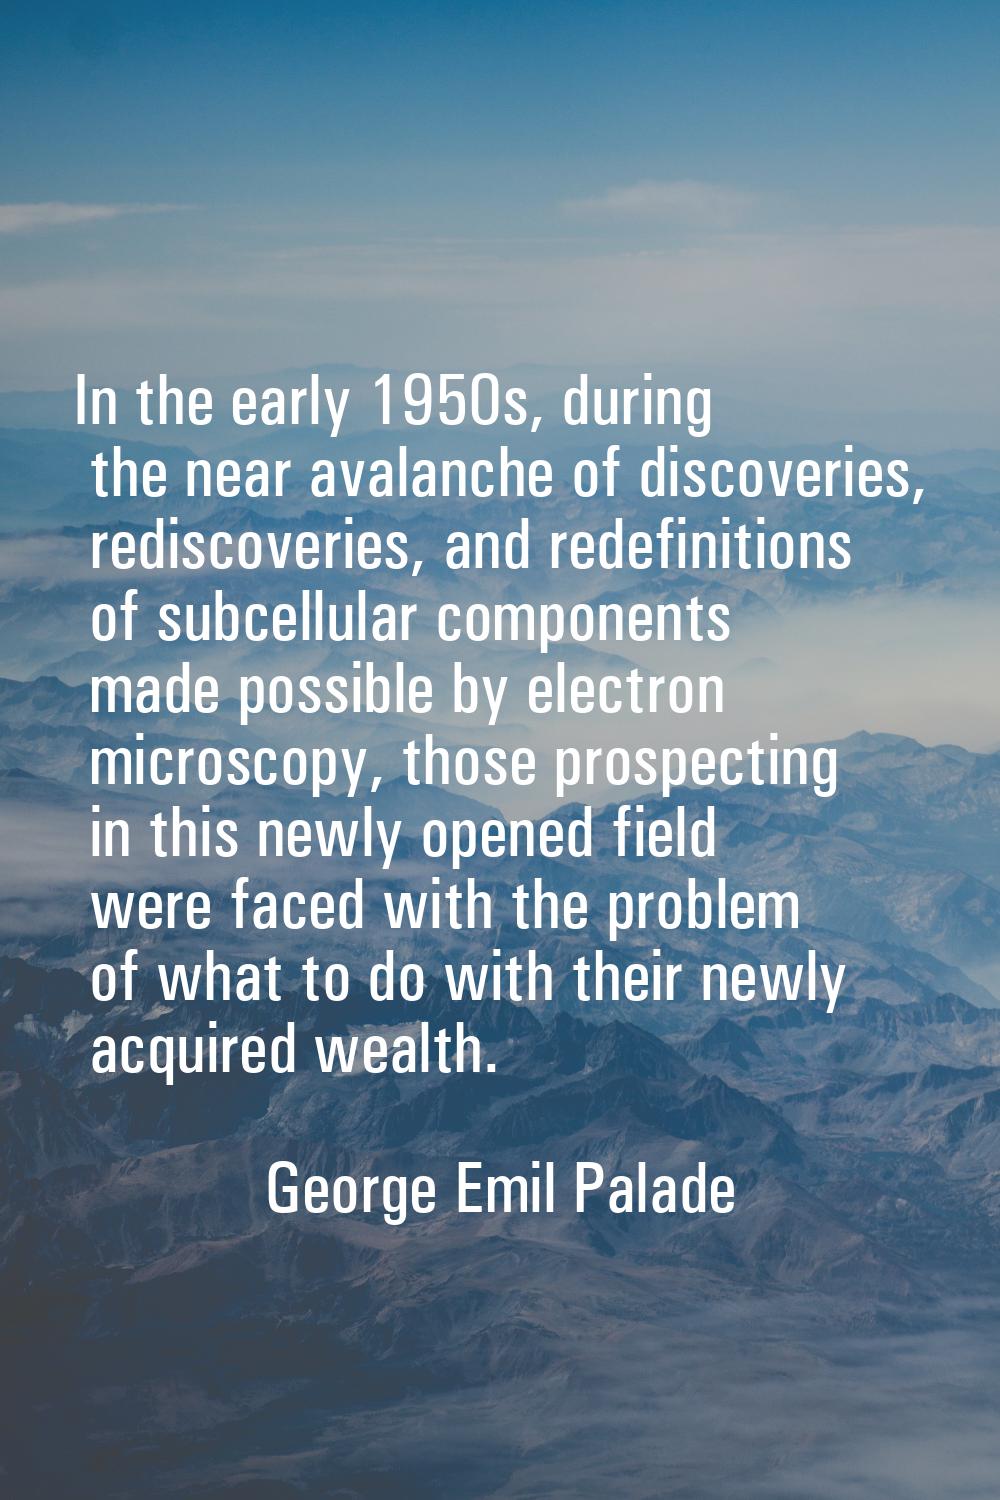 In the early 1950s, during the near avalanche of discoveries, rediscoveries, and redefinitions of s